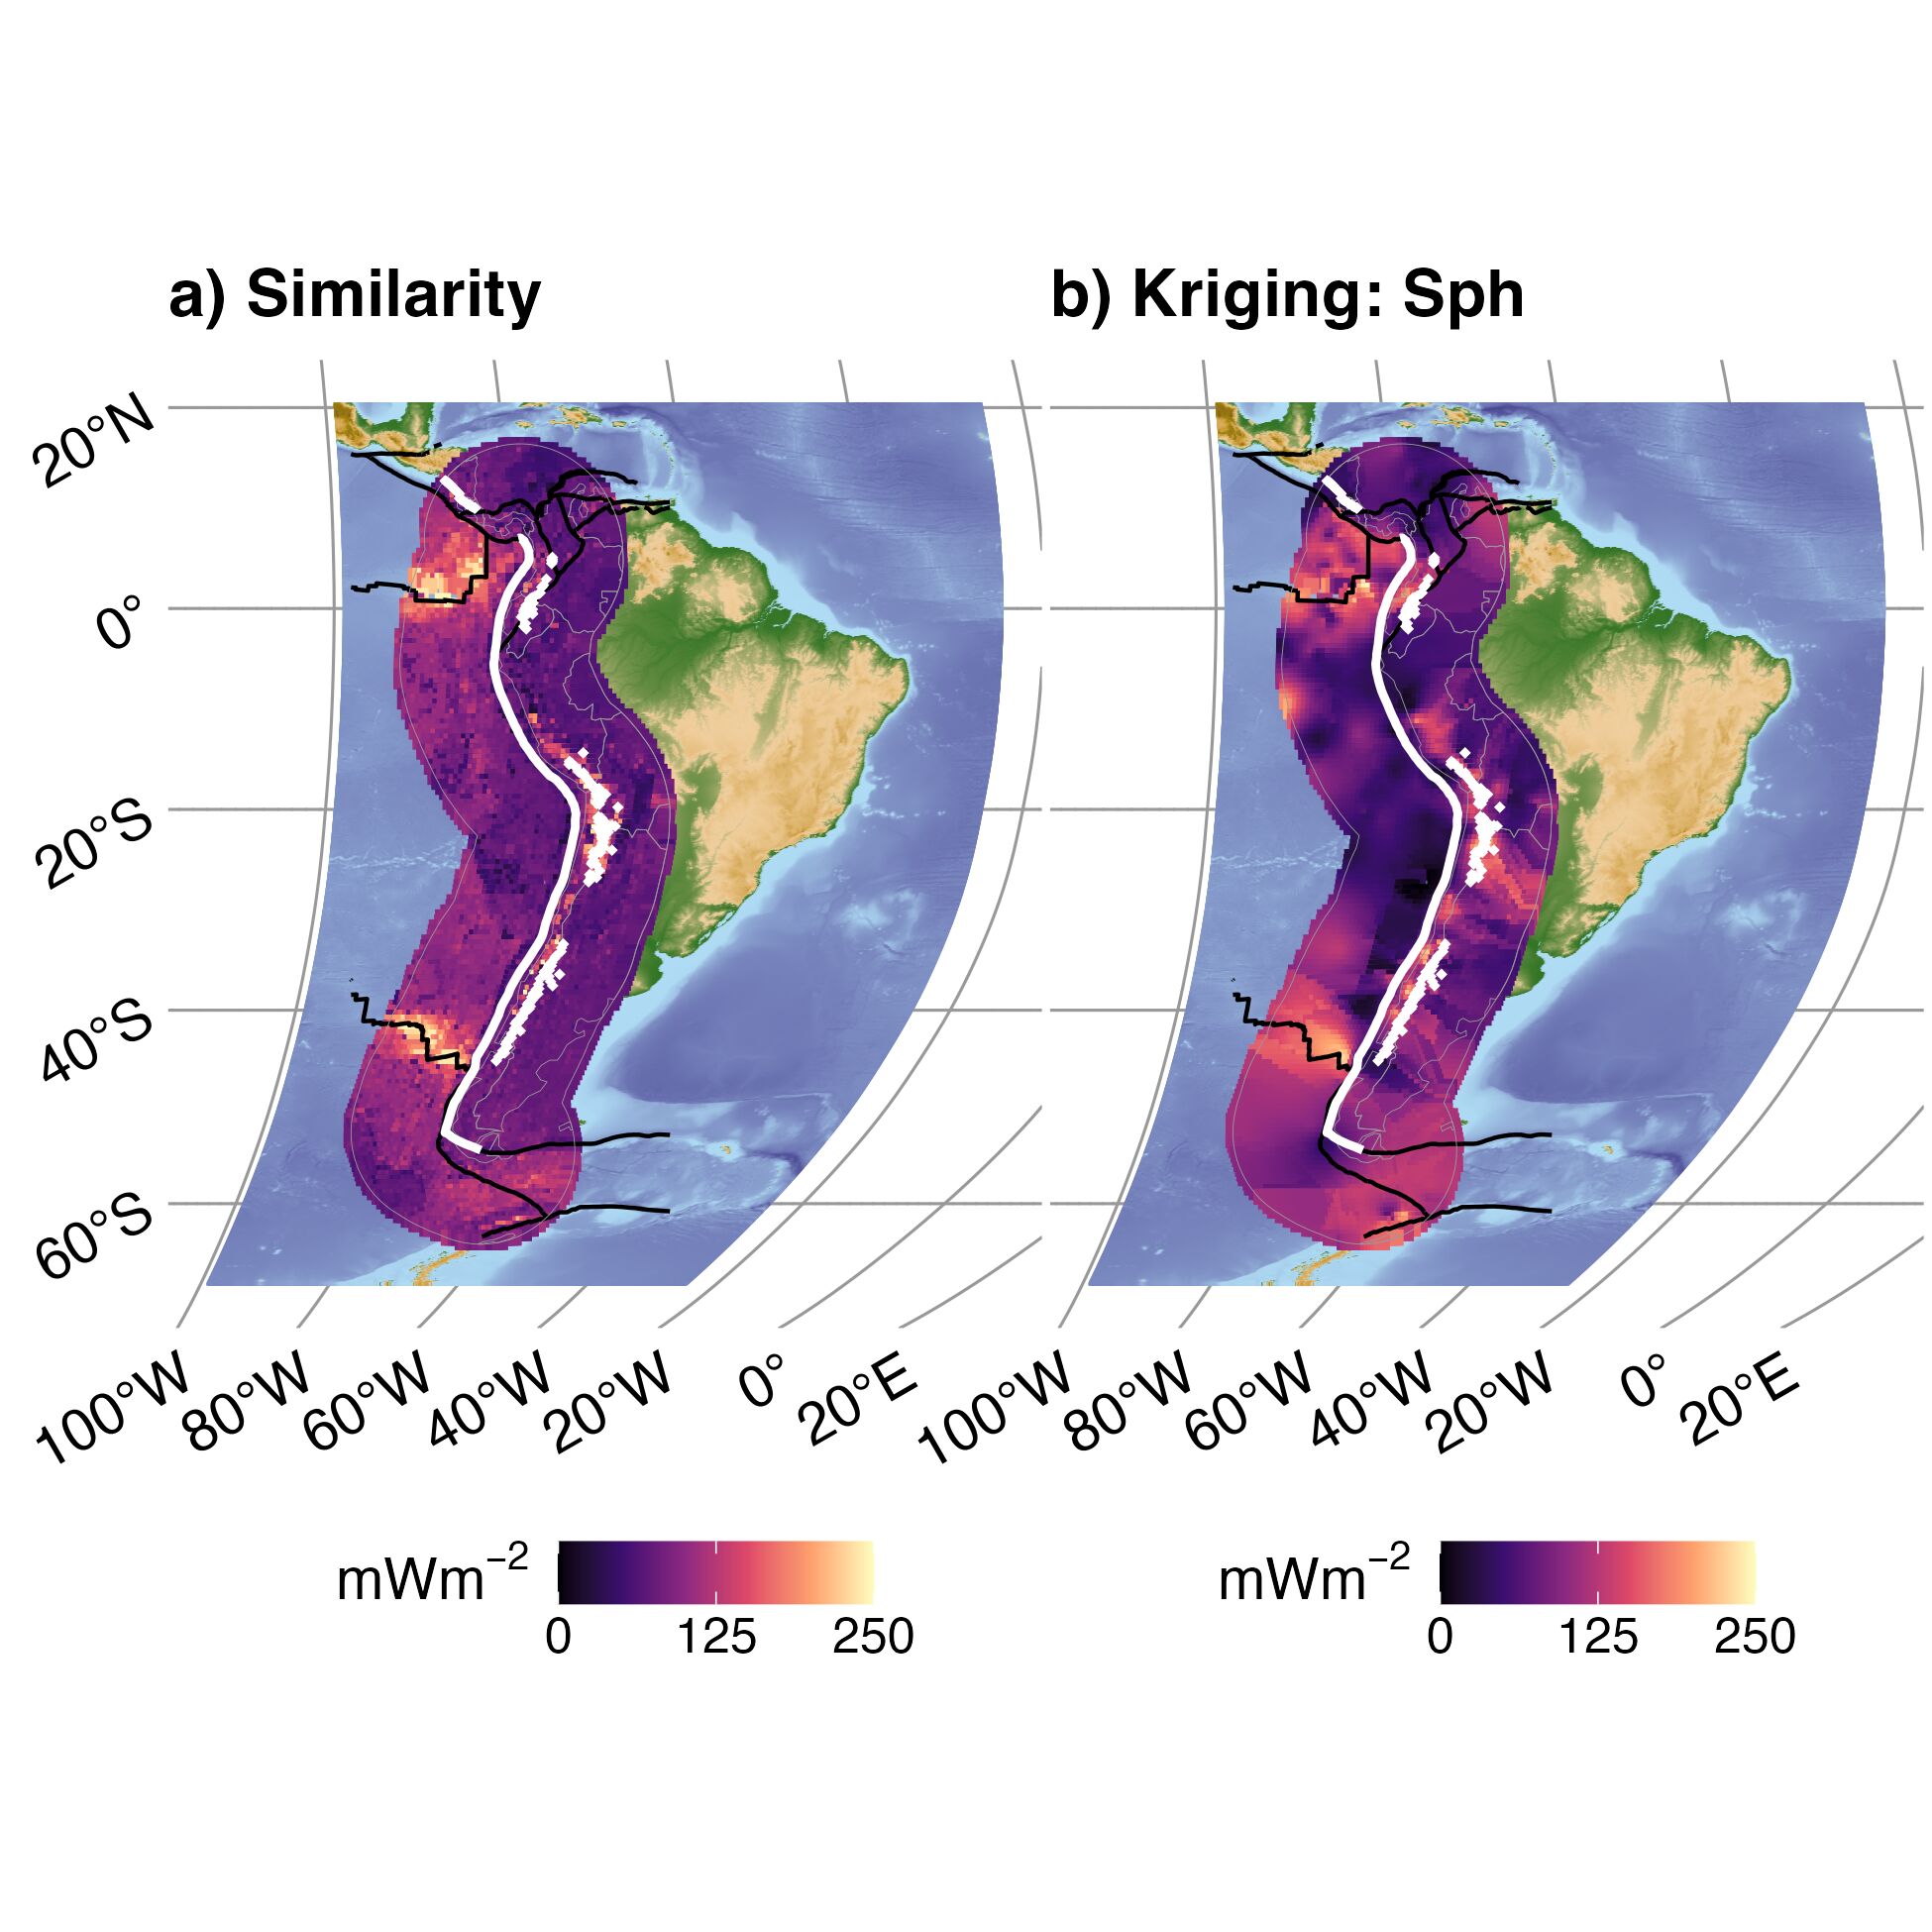 Similarity (a) and Kriging (b) interpolations for Andes. Refer to the main text for explanation of panels and colors.